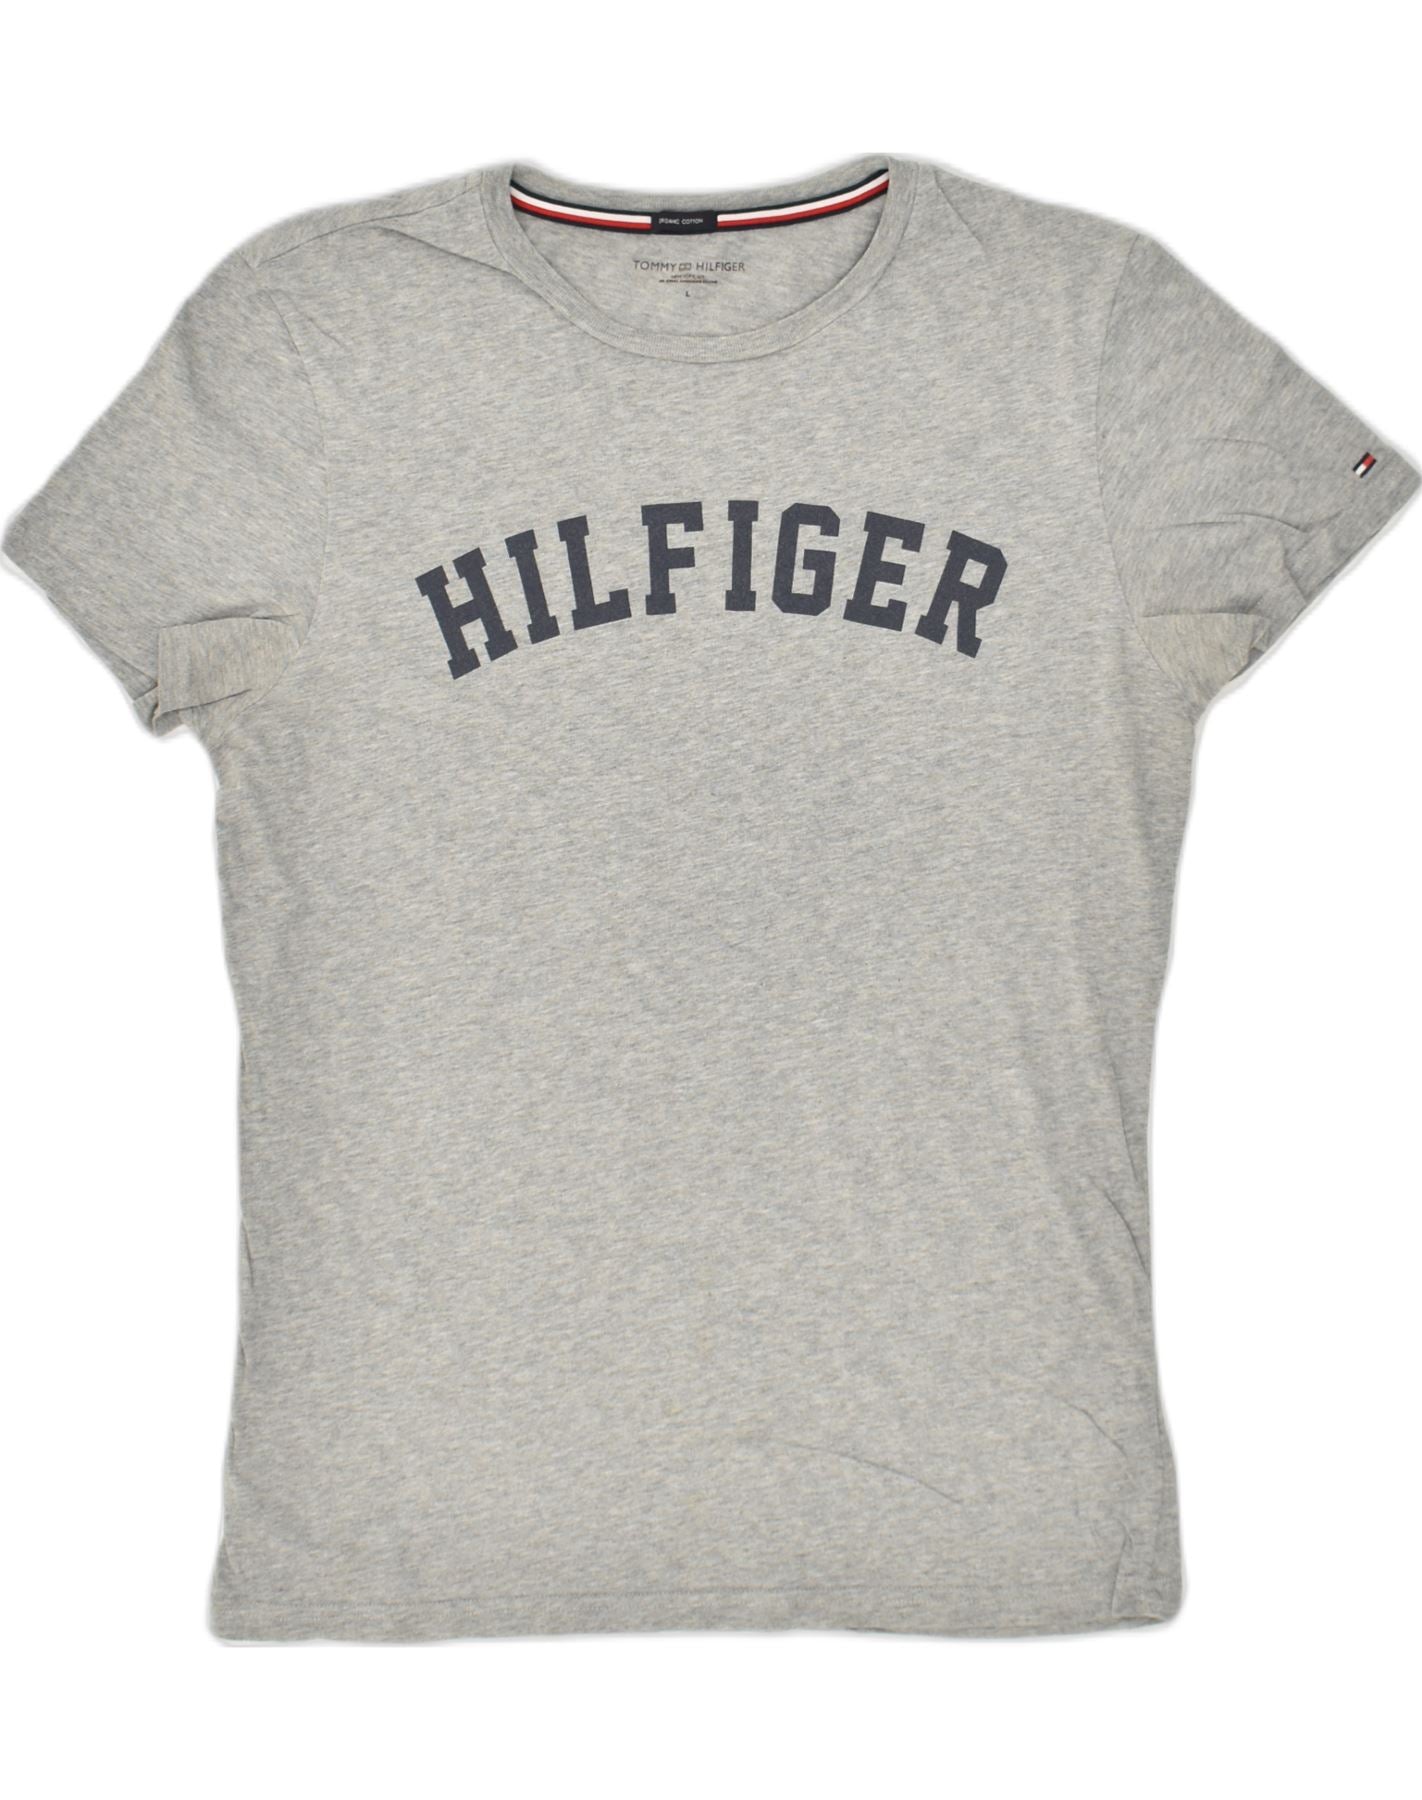 TOMMY HILFIGER Womens New York Graphic T-Shirt Top UK 14 Large